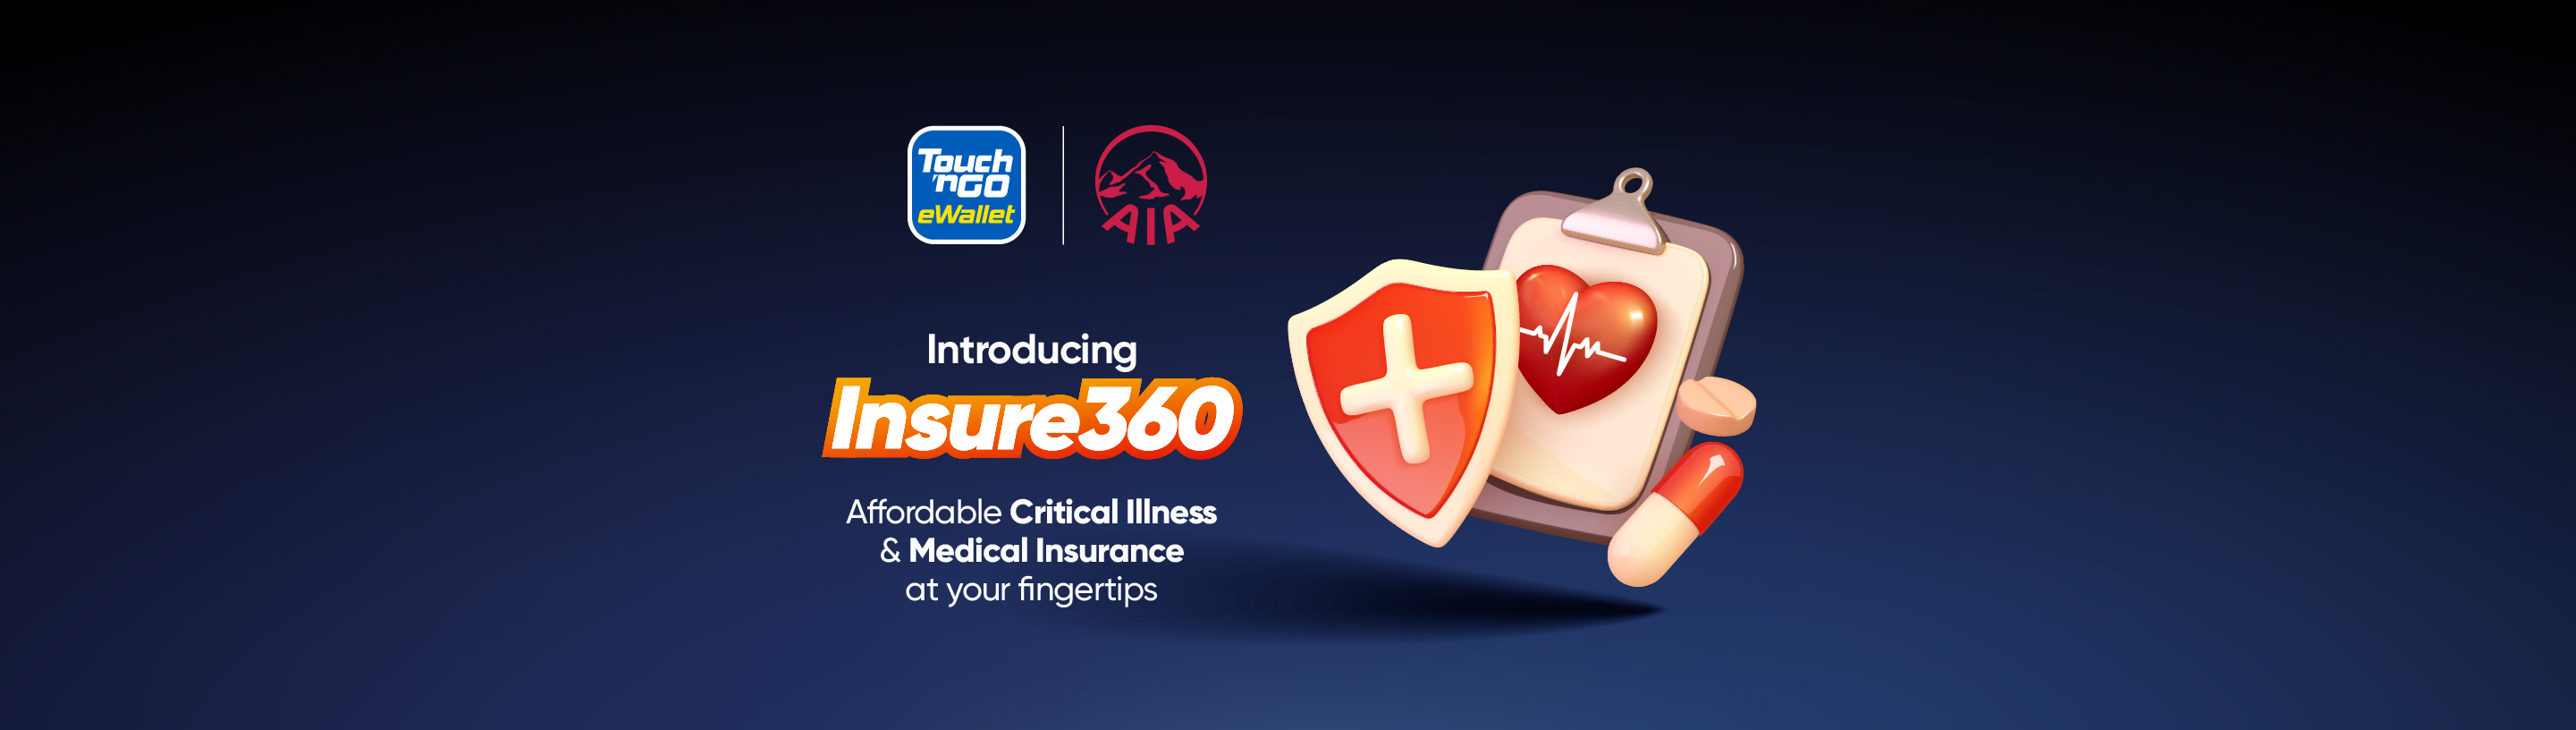 TNG Digital expands Touch ‘n Go eWallet insurance offerings with Insure360